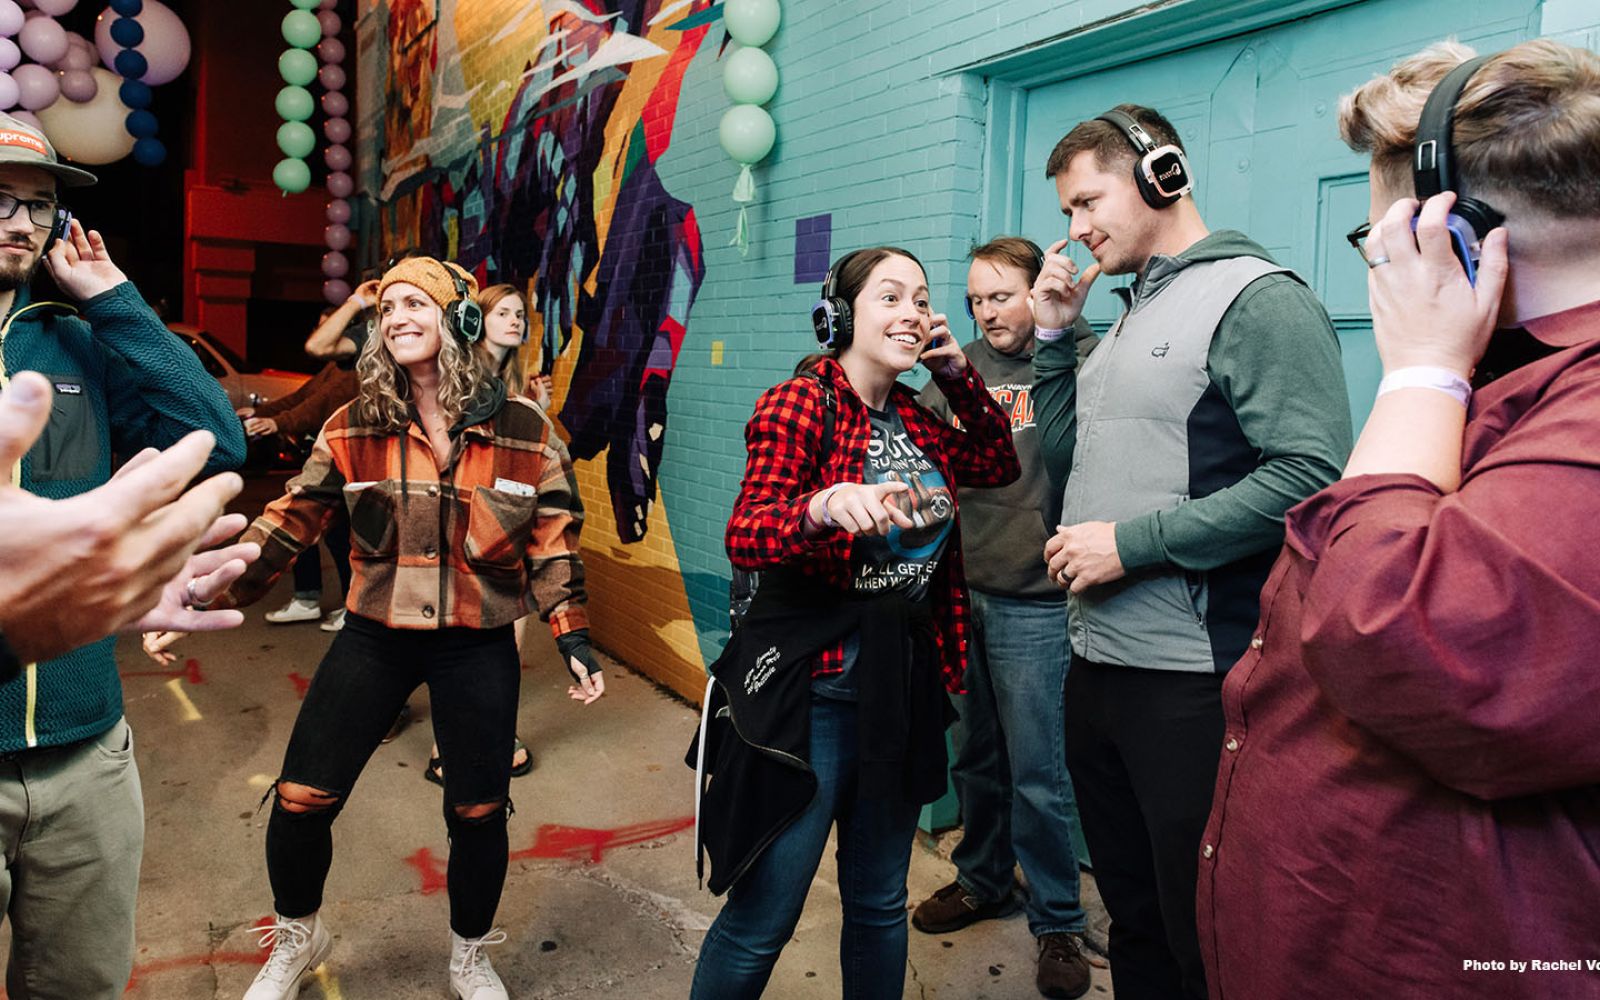 The silent disco will be one of the many attractions at Art Crawl: Alley Bash on Sept. 22 in downtown Fort Wayne.